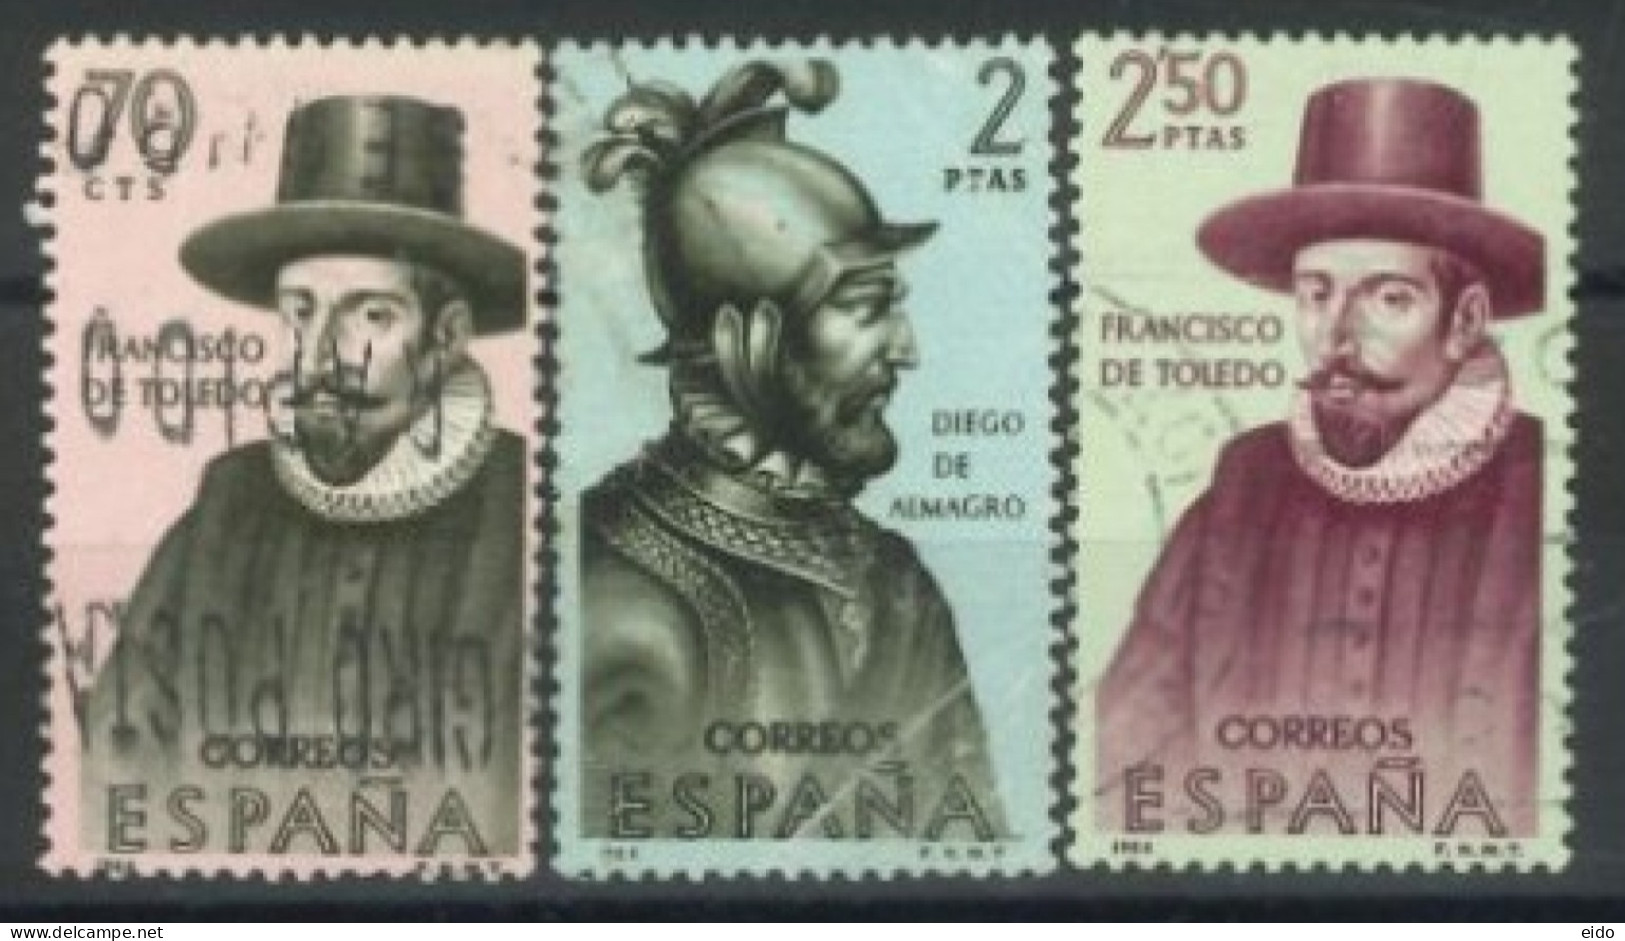 SPAIN, 1964, BUILDERS OF THE NEW WORLD STAMPS SET OF 3, # 1272,1274,& 1276, USED. - Used Stamps